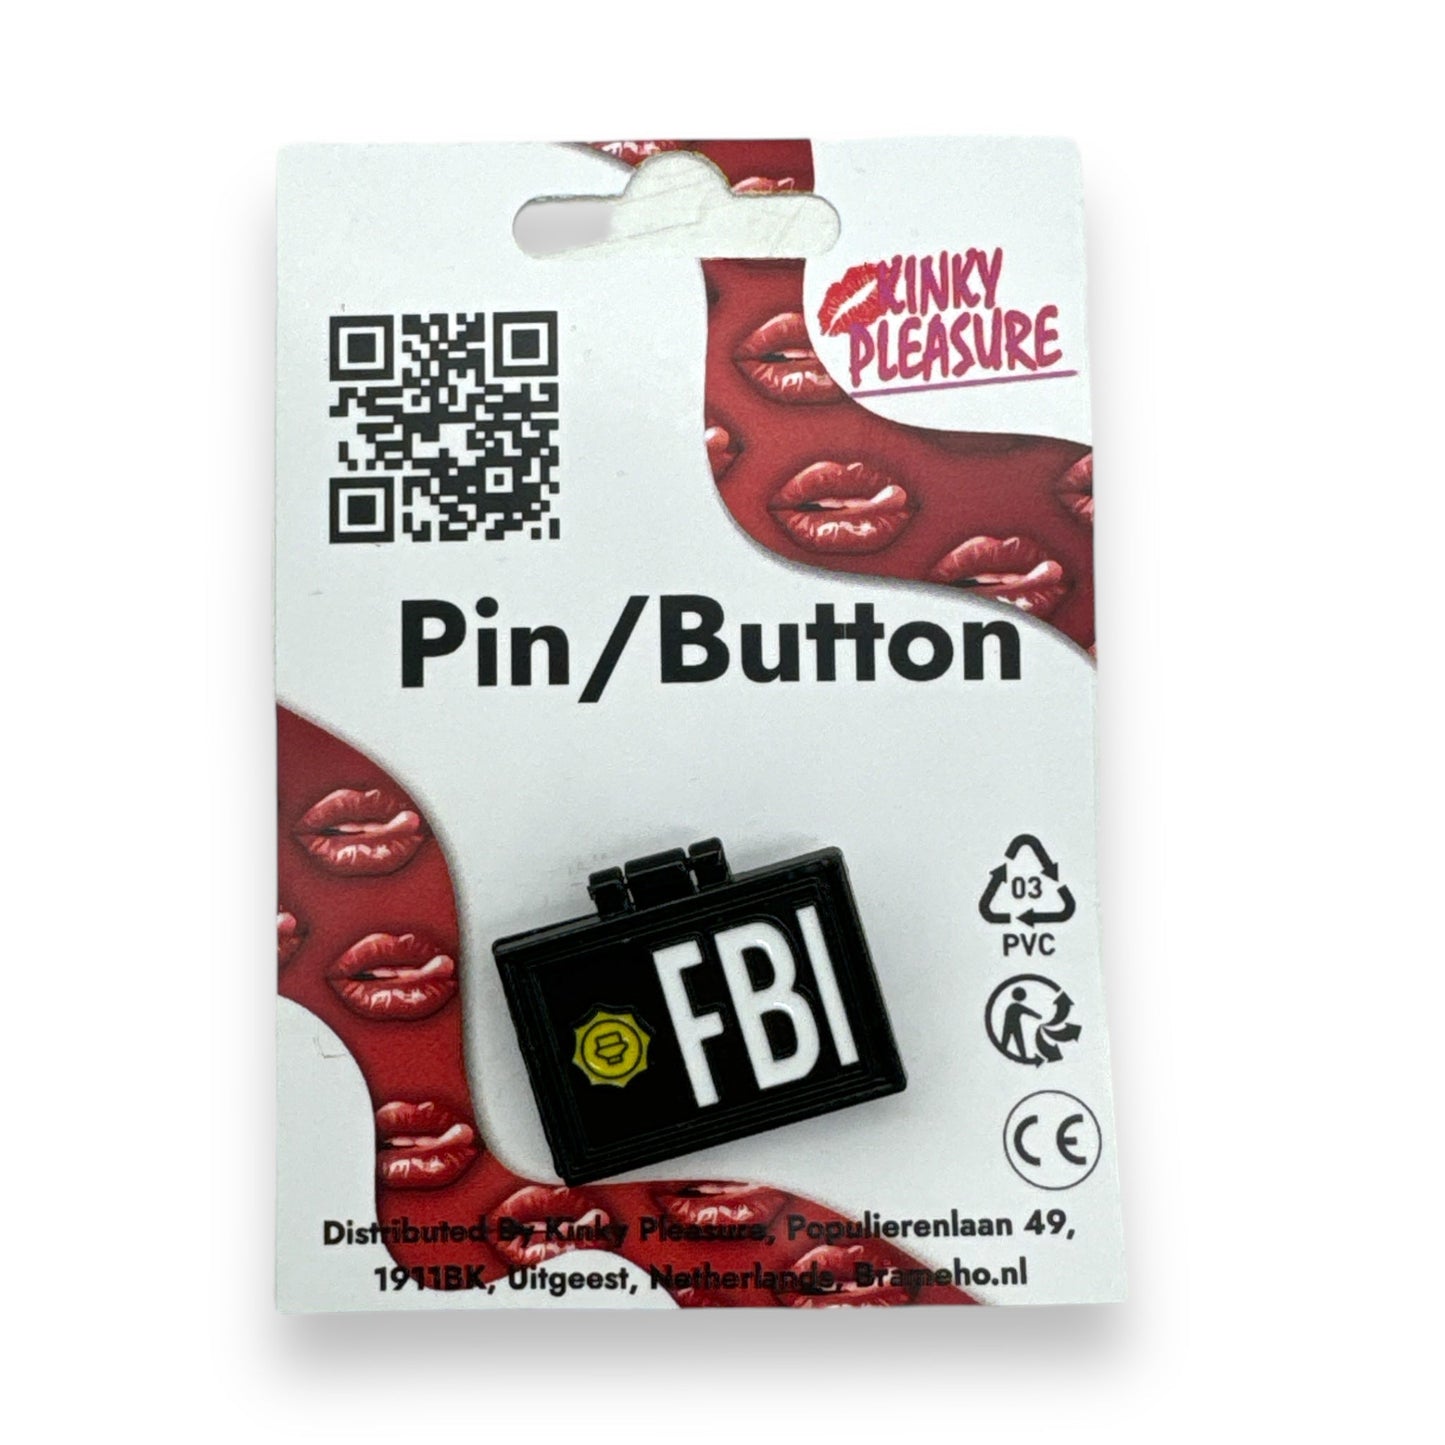 Kinky Pleasure - T001 - Sexy Badge FBI - Pin/Button - Add a Playful Touch to Your Outfit